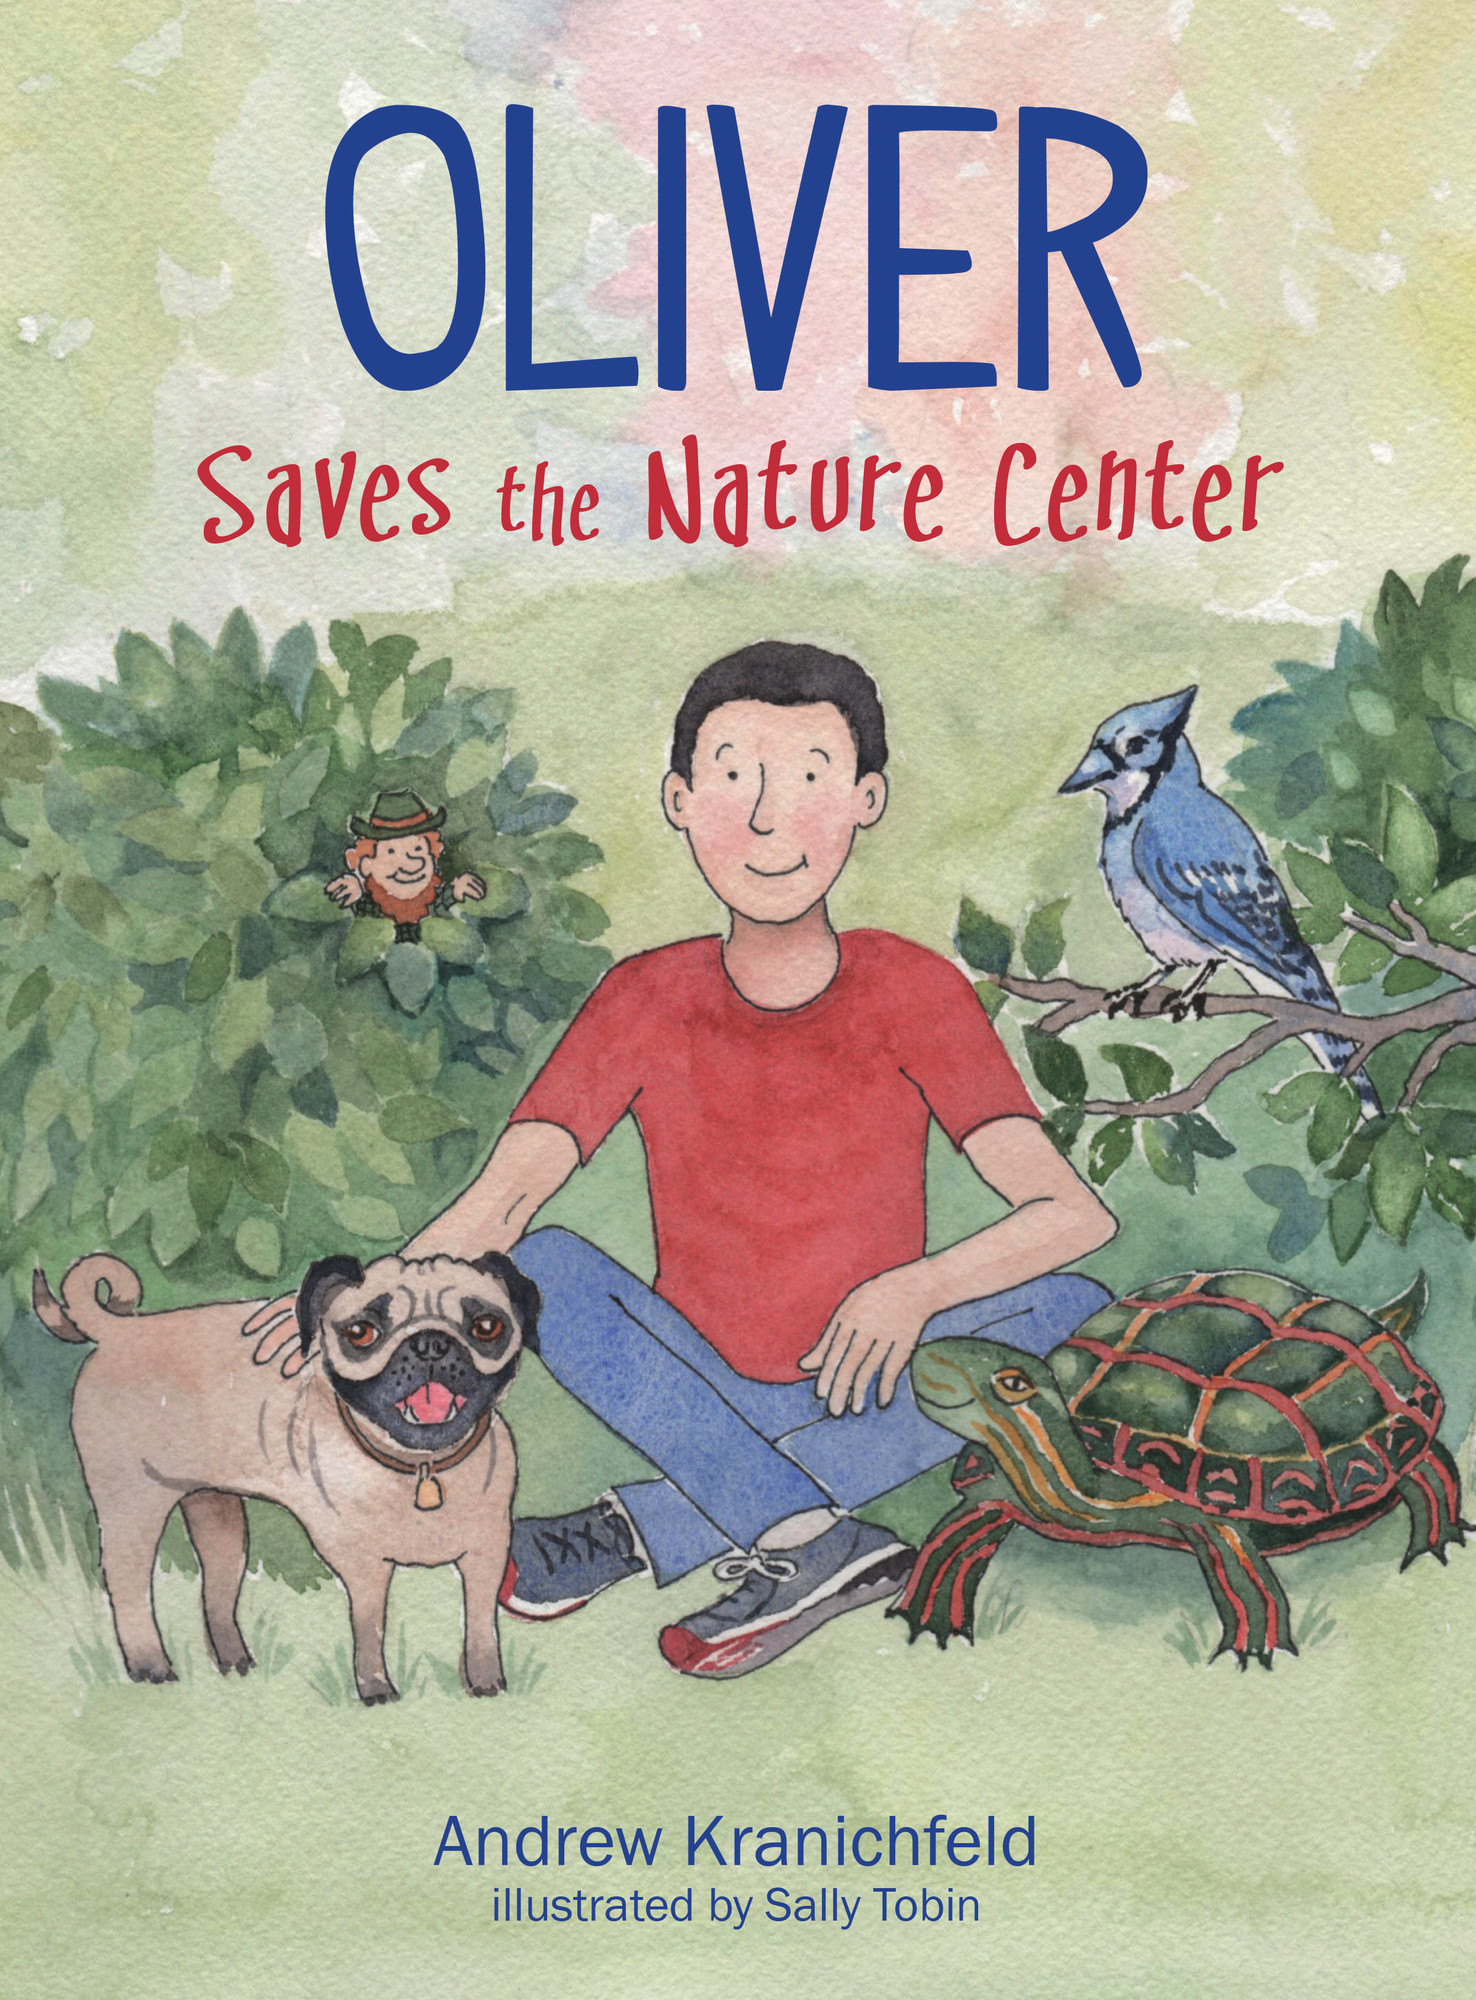 'Oliver Saves the Nature Center,' a book by local Kingsbridge author Andrew Kranichfeld.